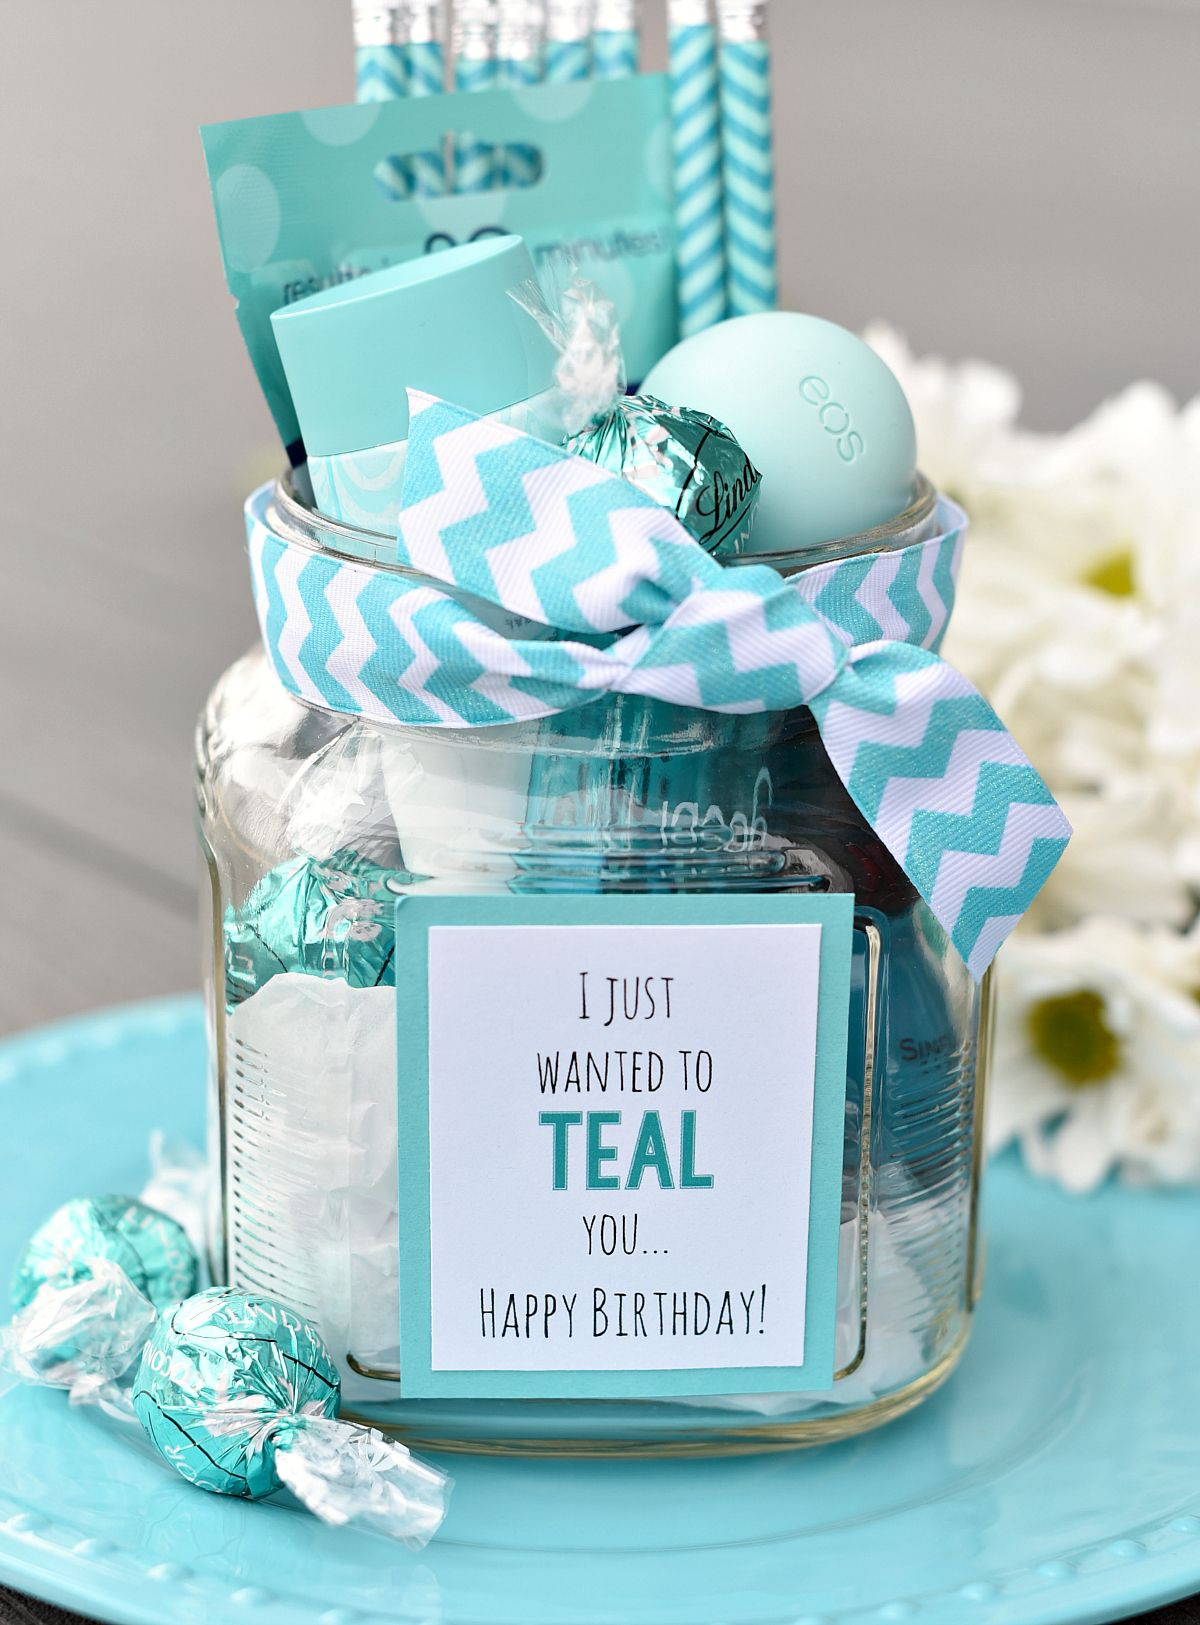 Creative Birthday Gifts For Best Friend
 Teal Birthday Gift Idea for Friends